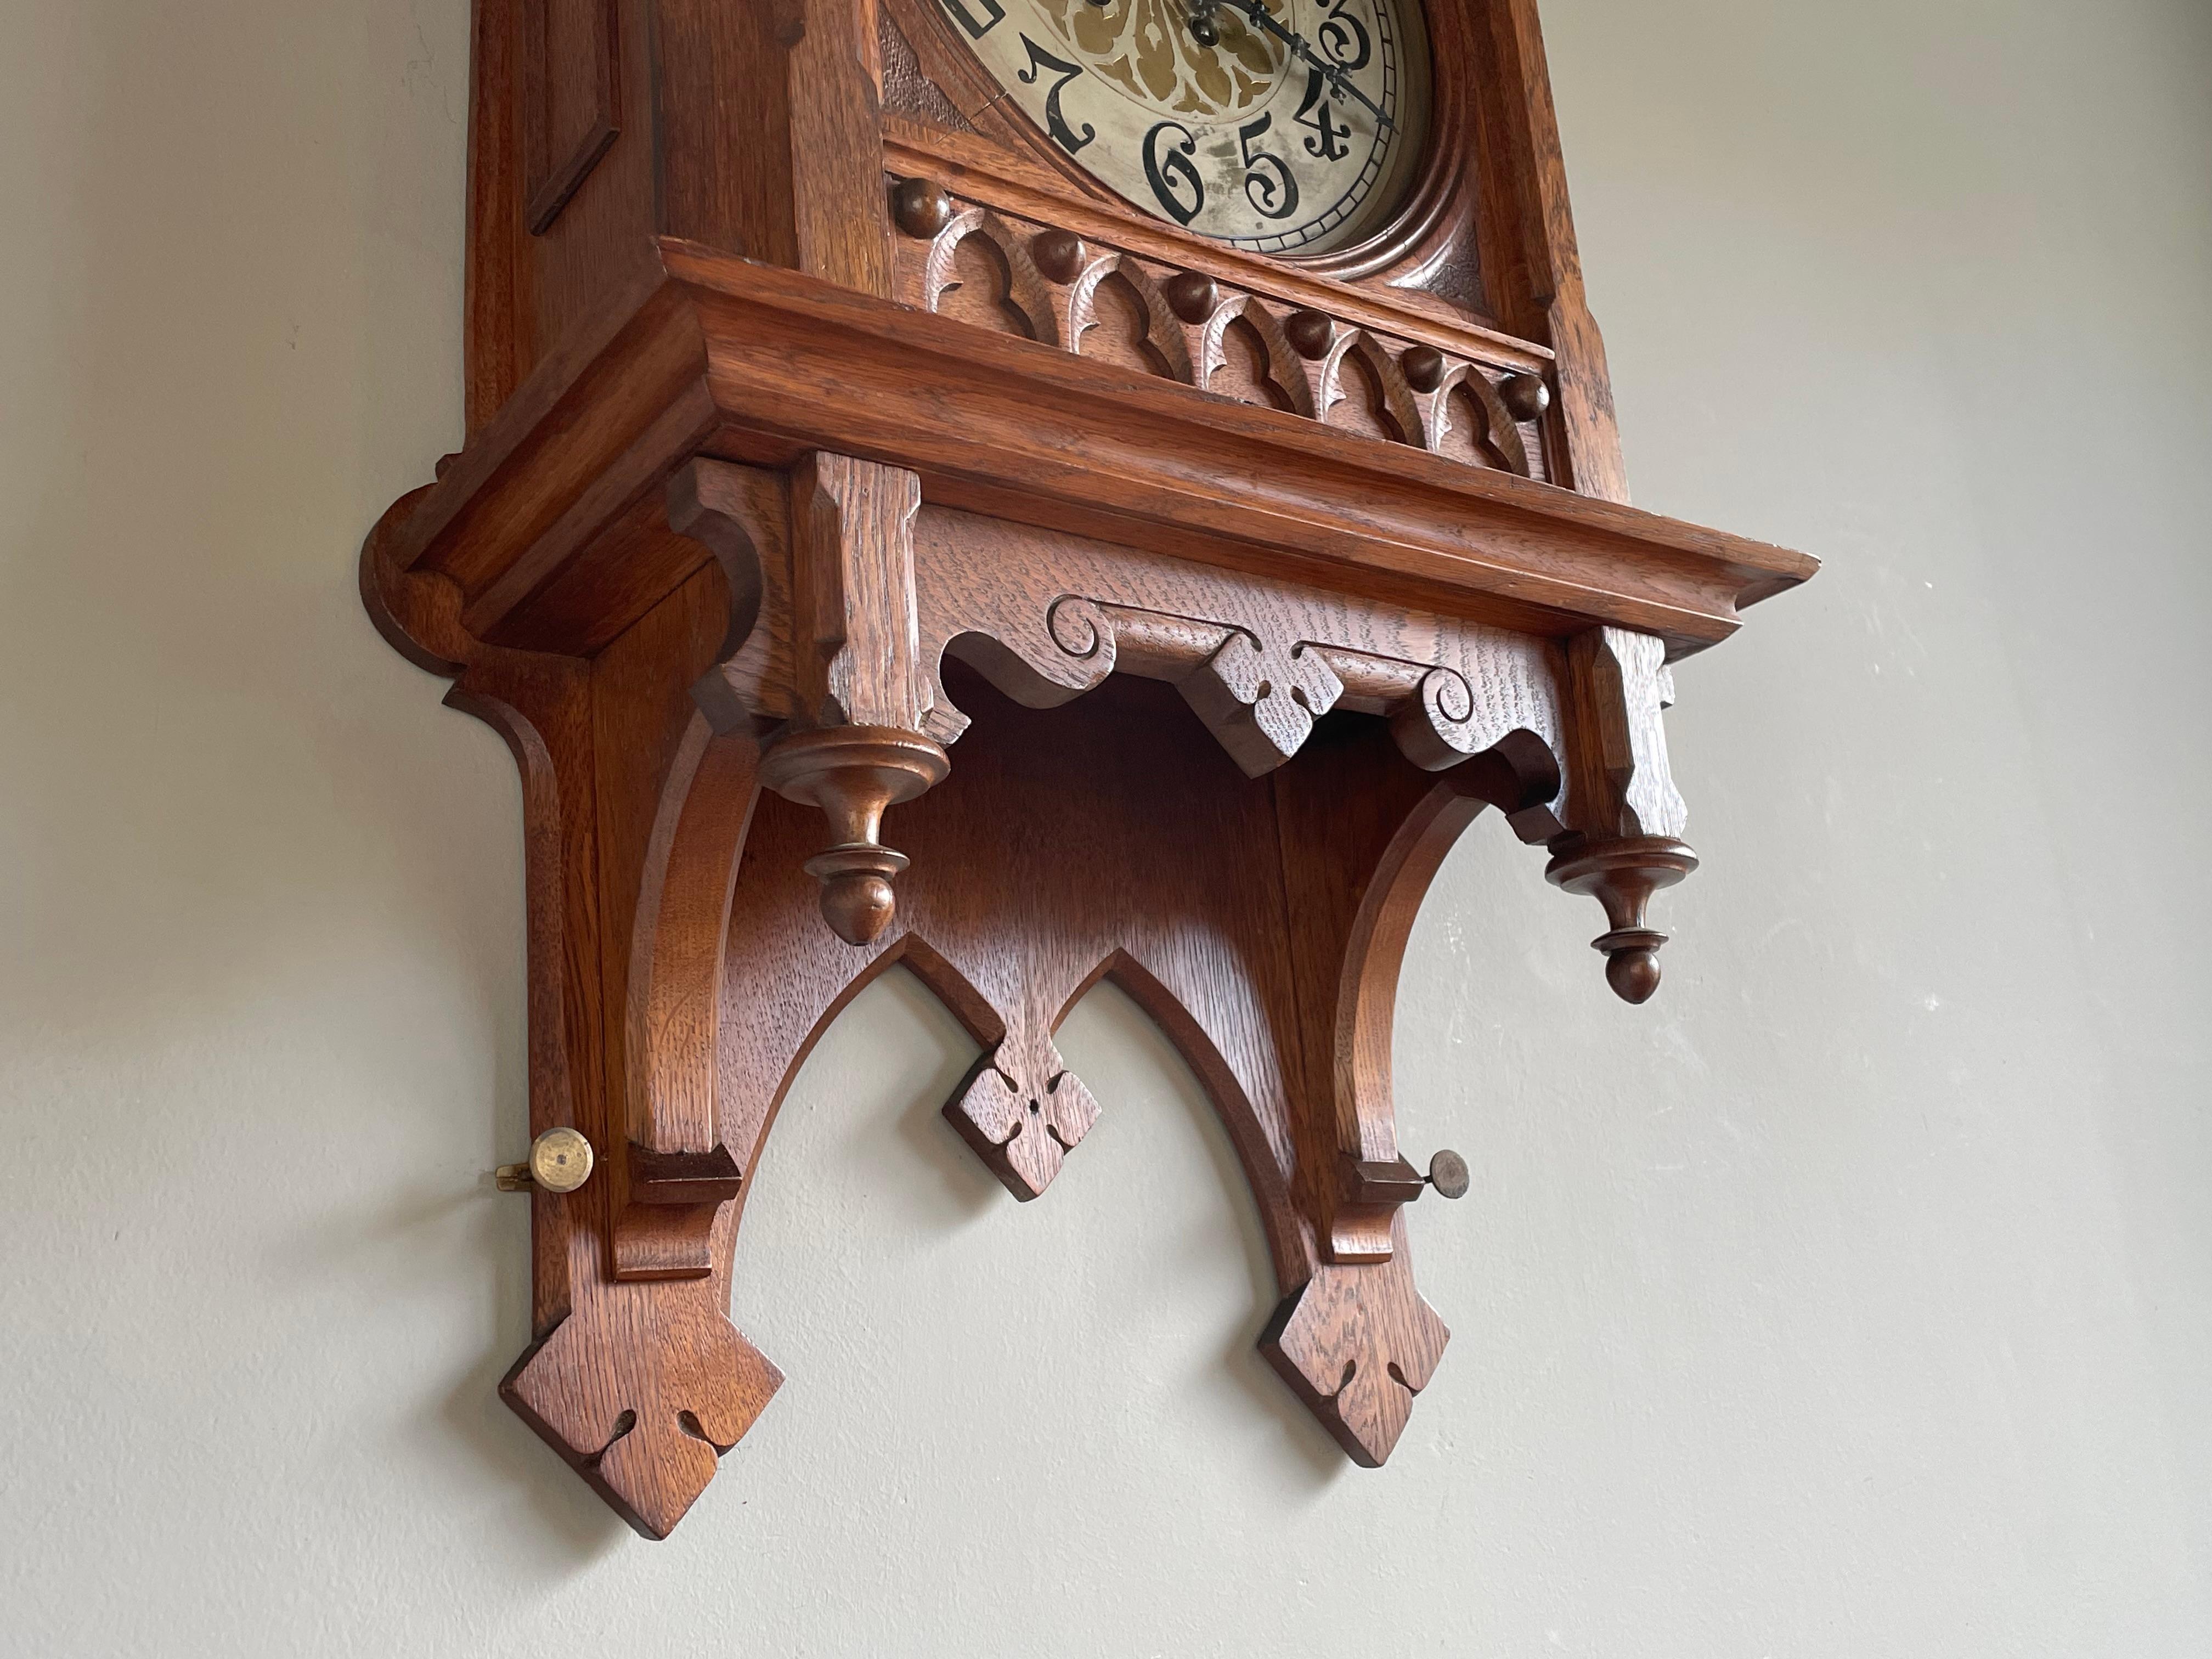 20th Century Rare & Large Antique Hand Carved Gothic Revival Wall Clock w. Lenzkirch Movement For Sale